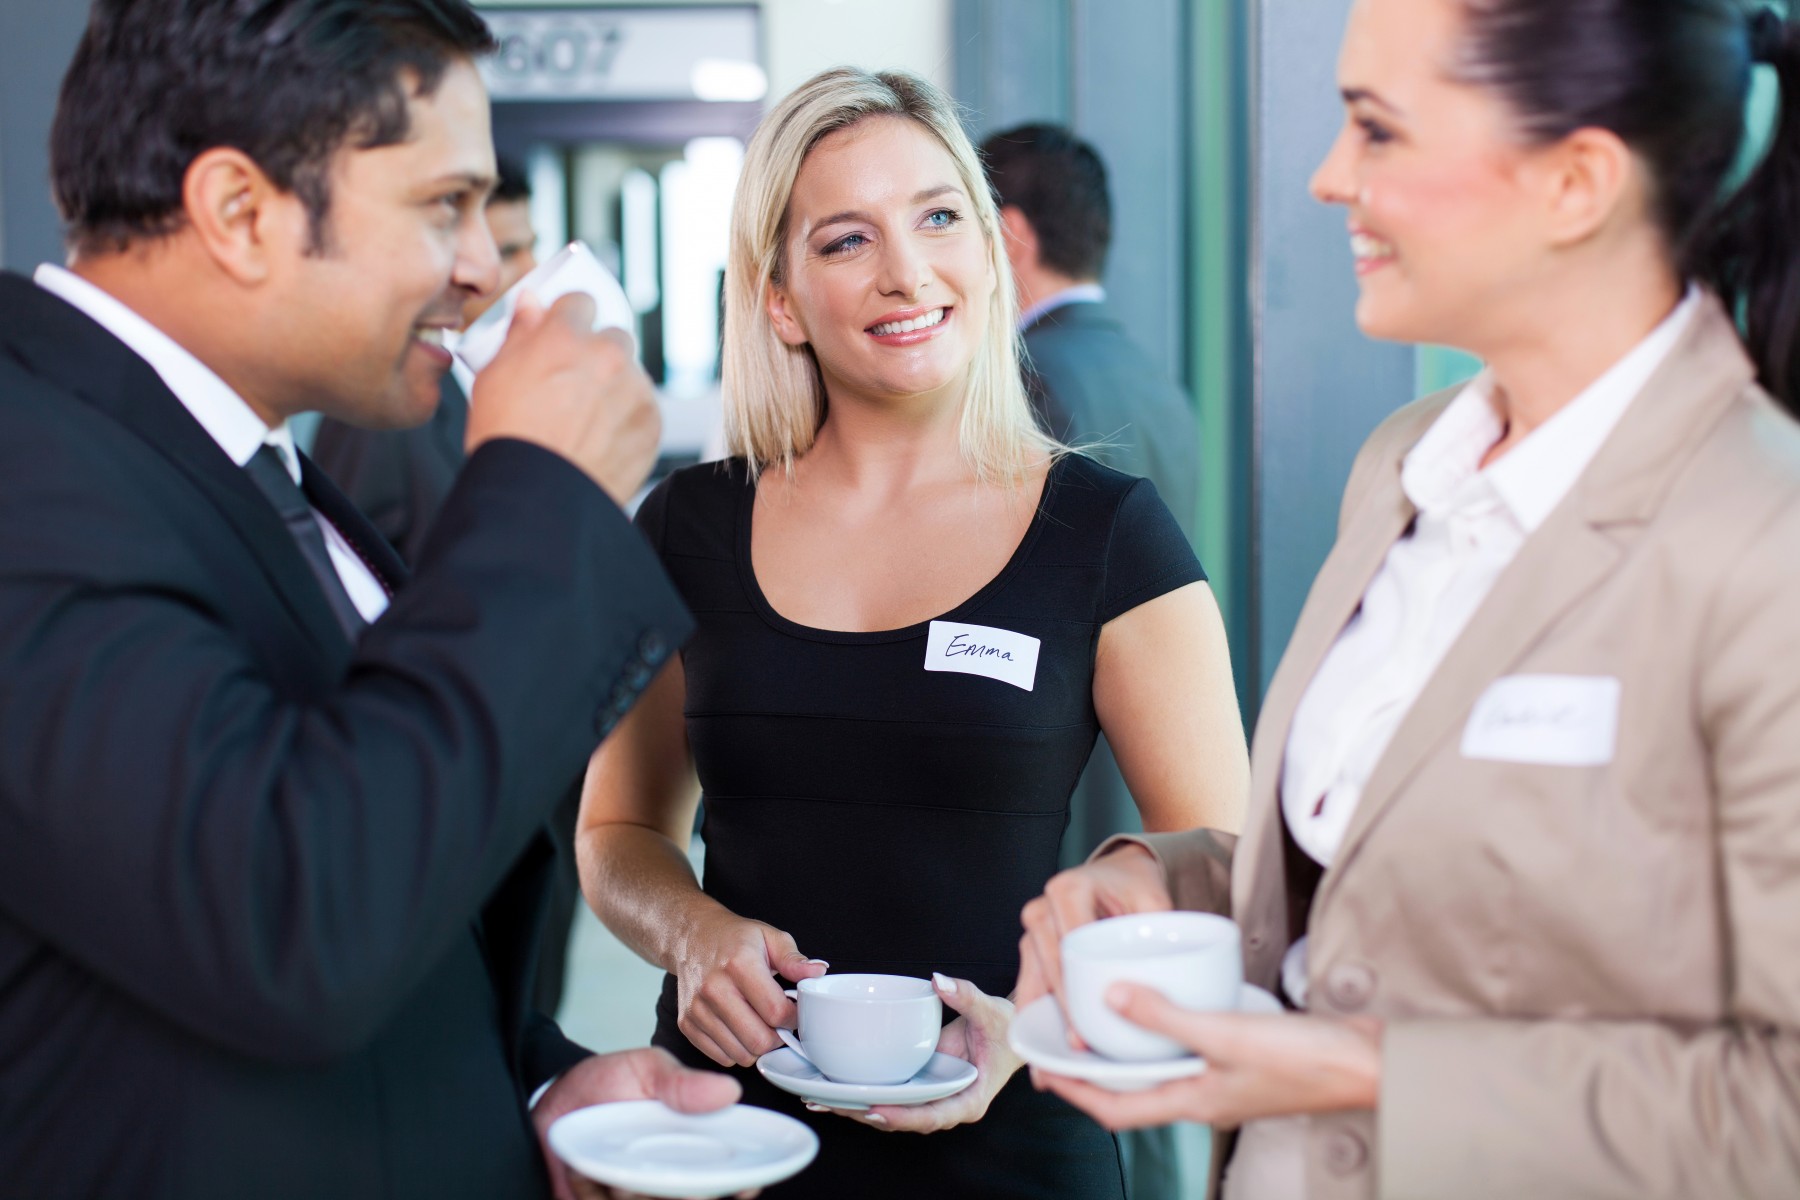 How to Network Effectively at Events